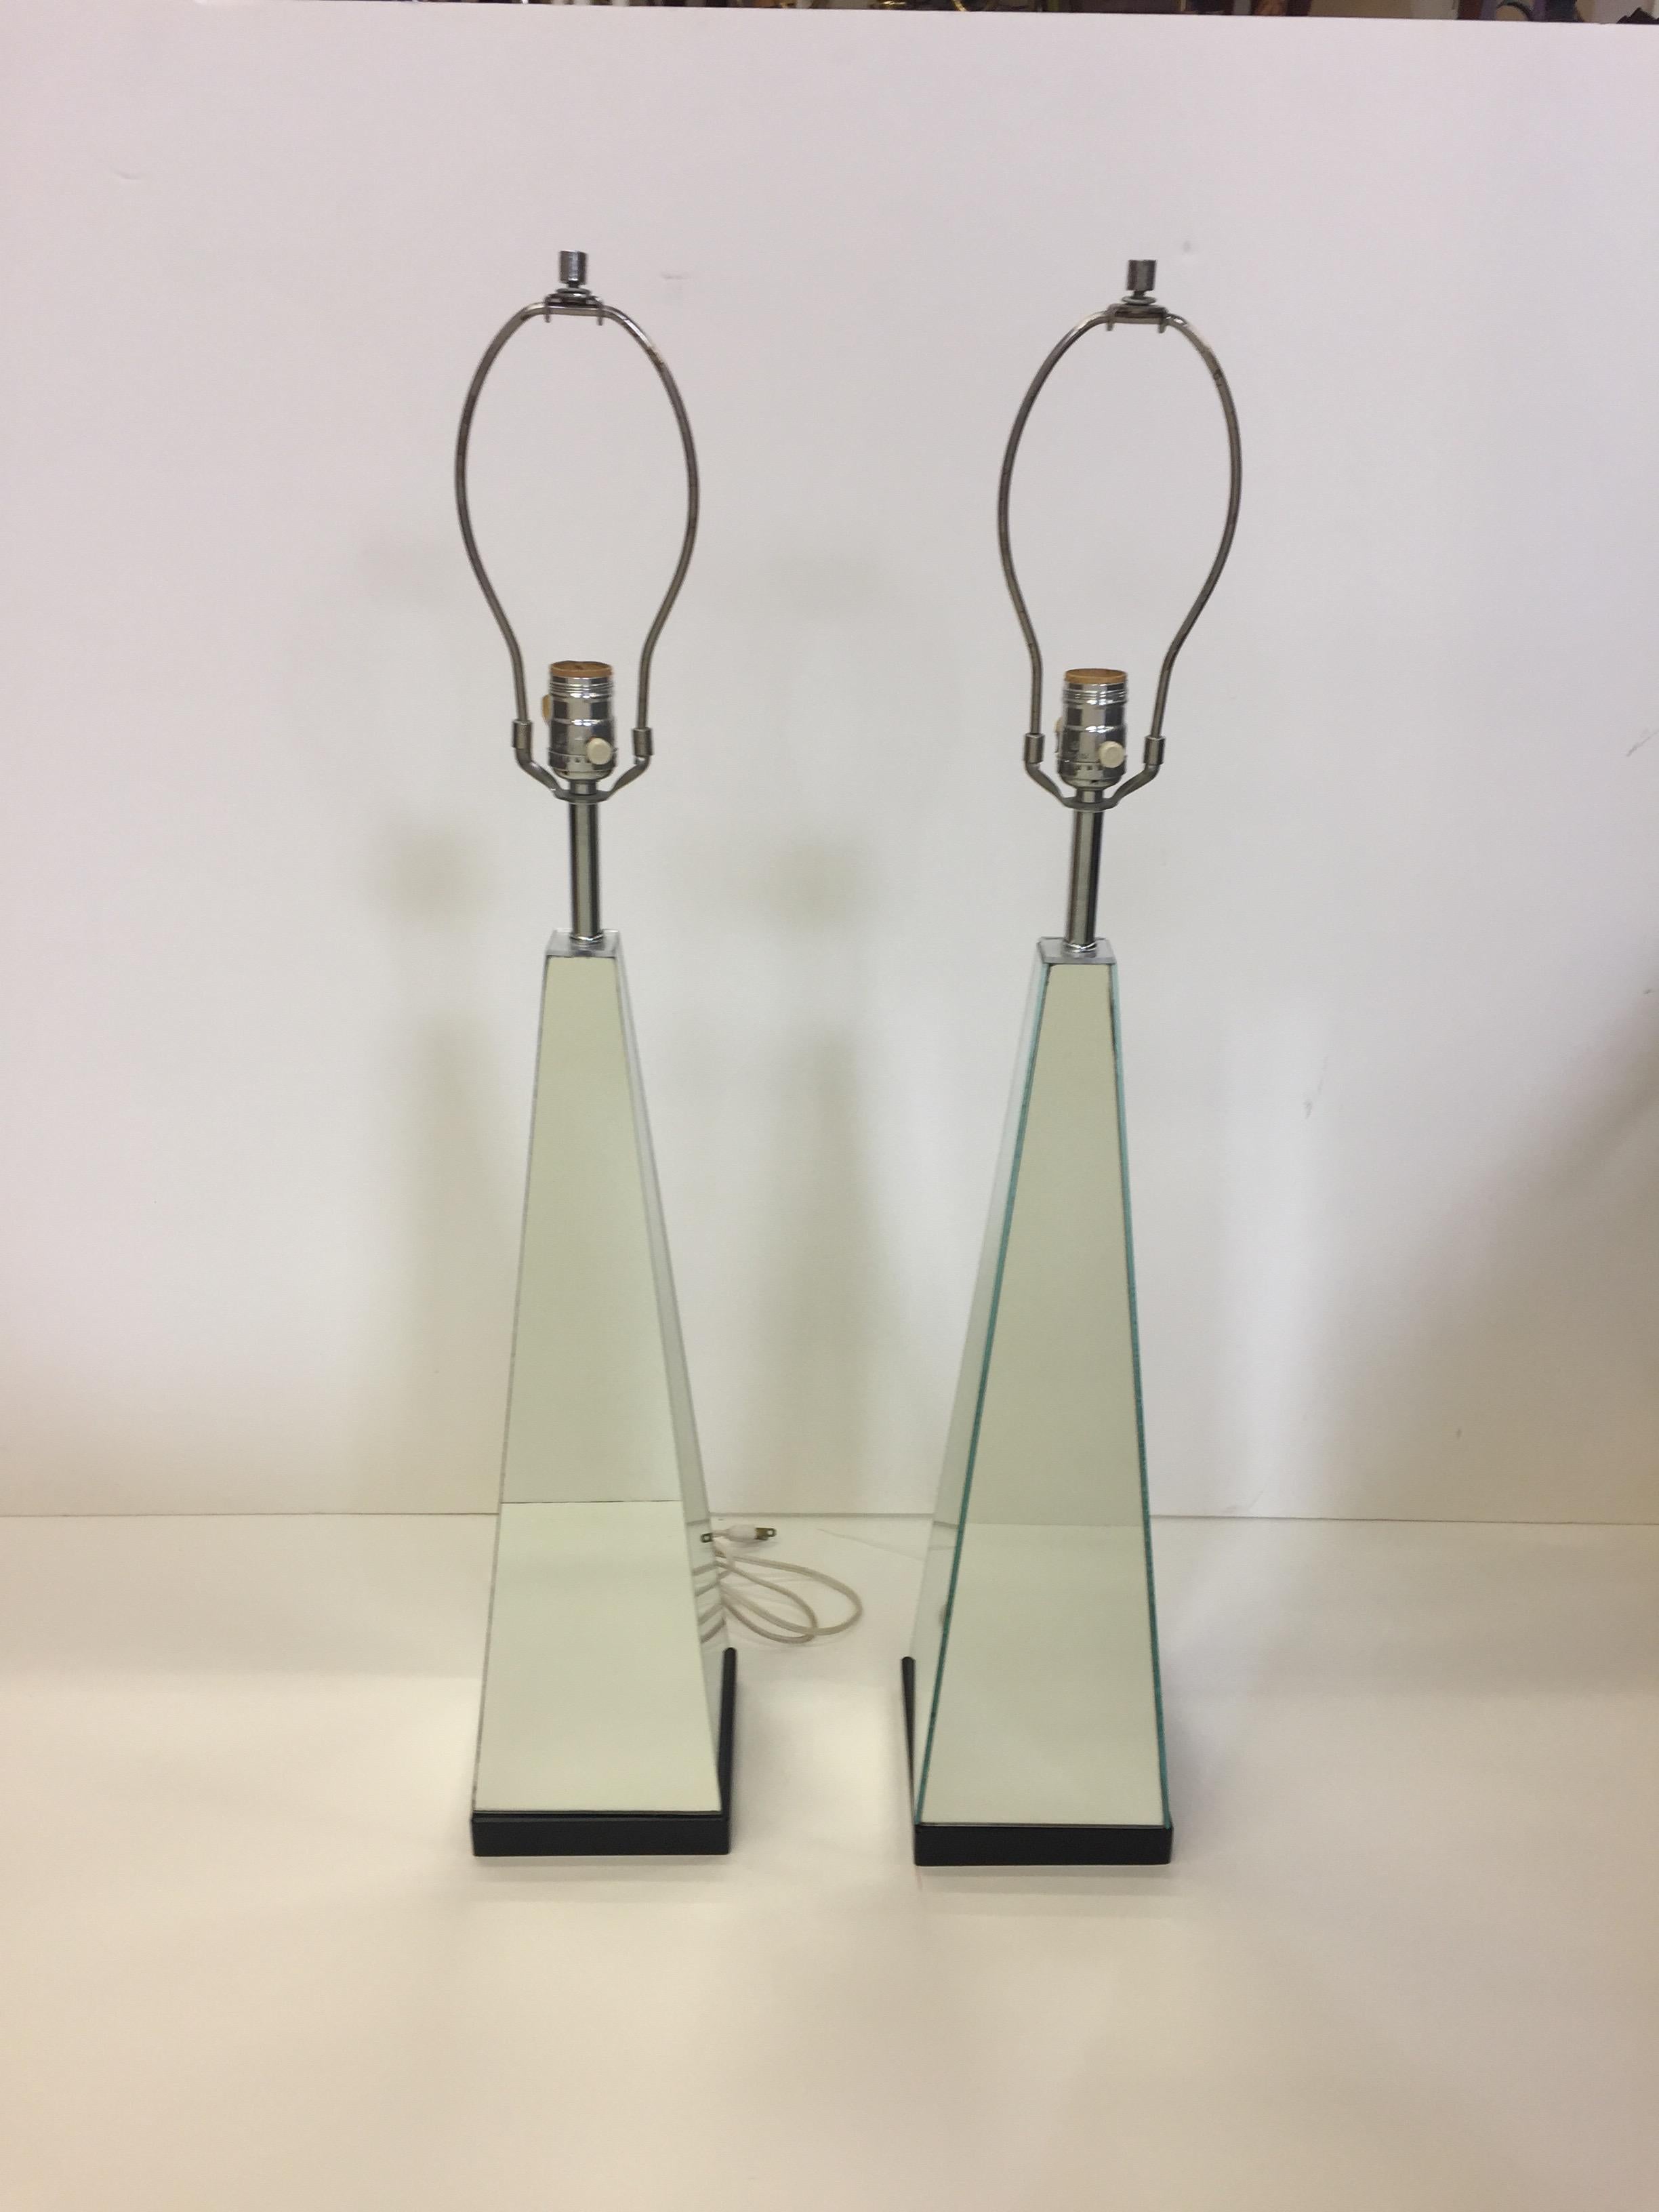 Pair of Mid-Century Modern Mirrored Obelisk Table Lamps For Sale 1